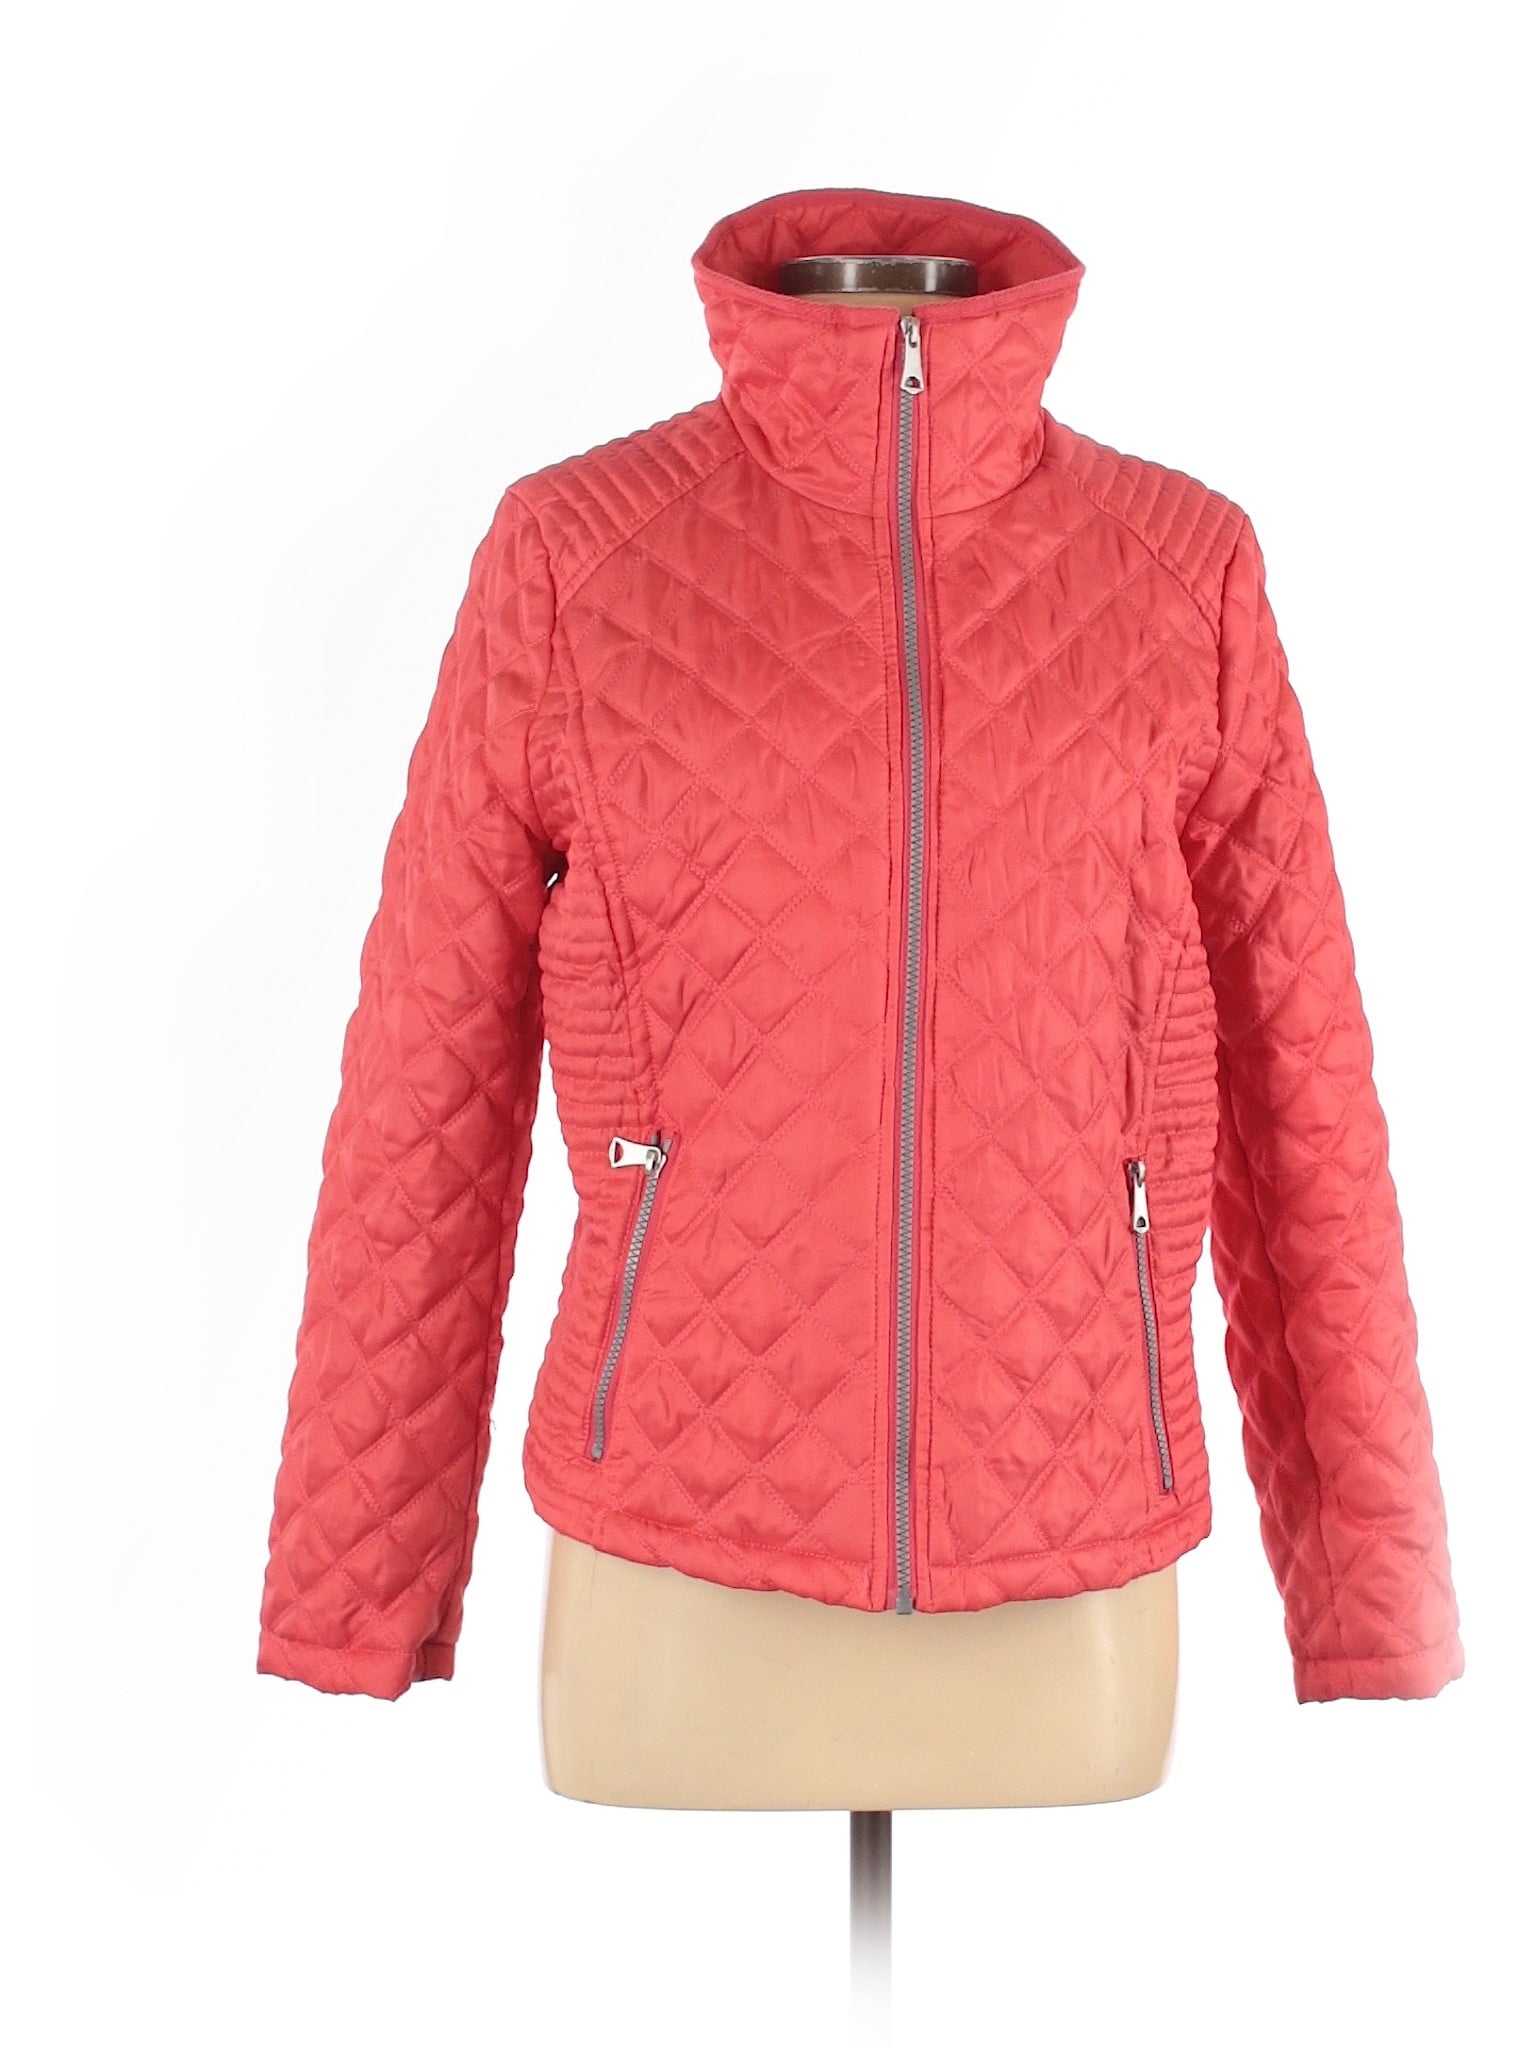 Marc New York - Pre-Owned Marc New York Women's Size M Jacket - Walmart ...